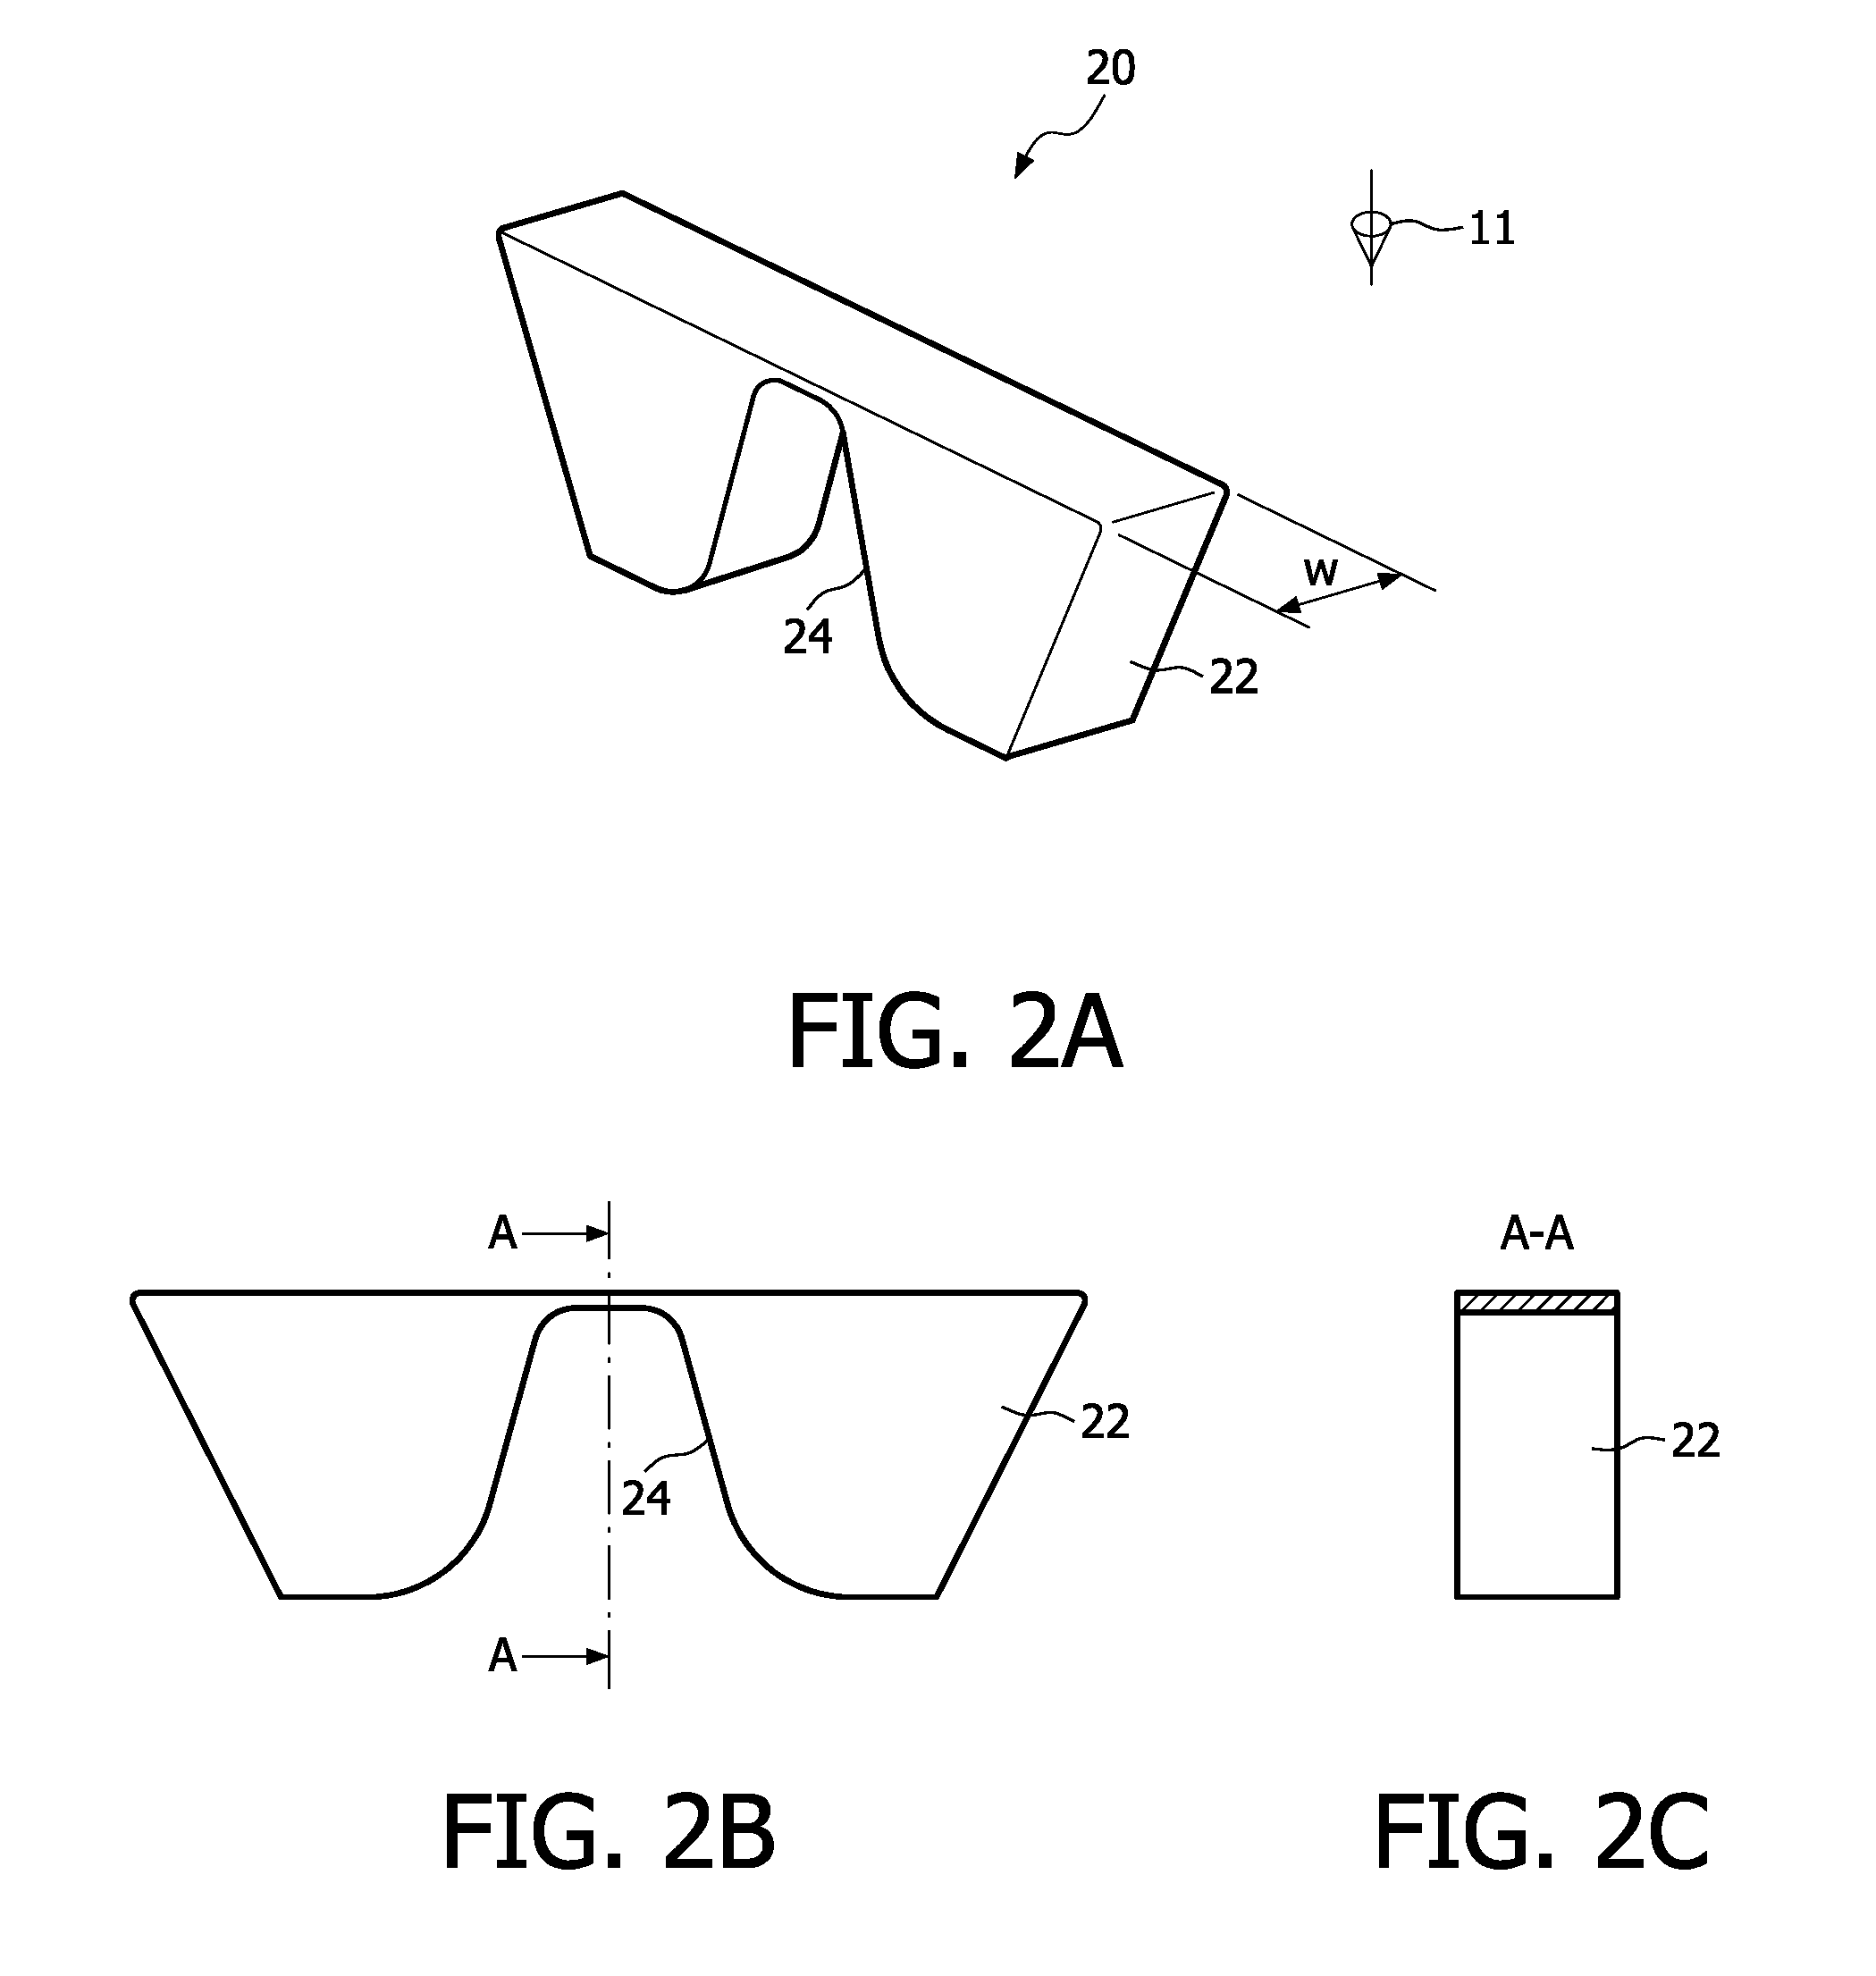 Filter assembly for computed tomography systems